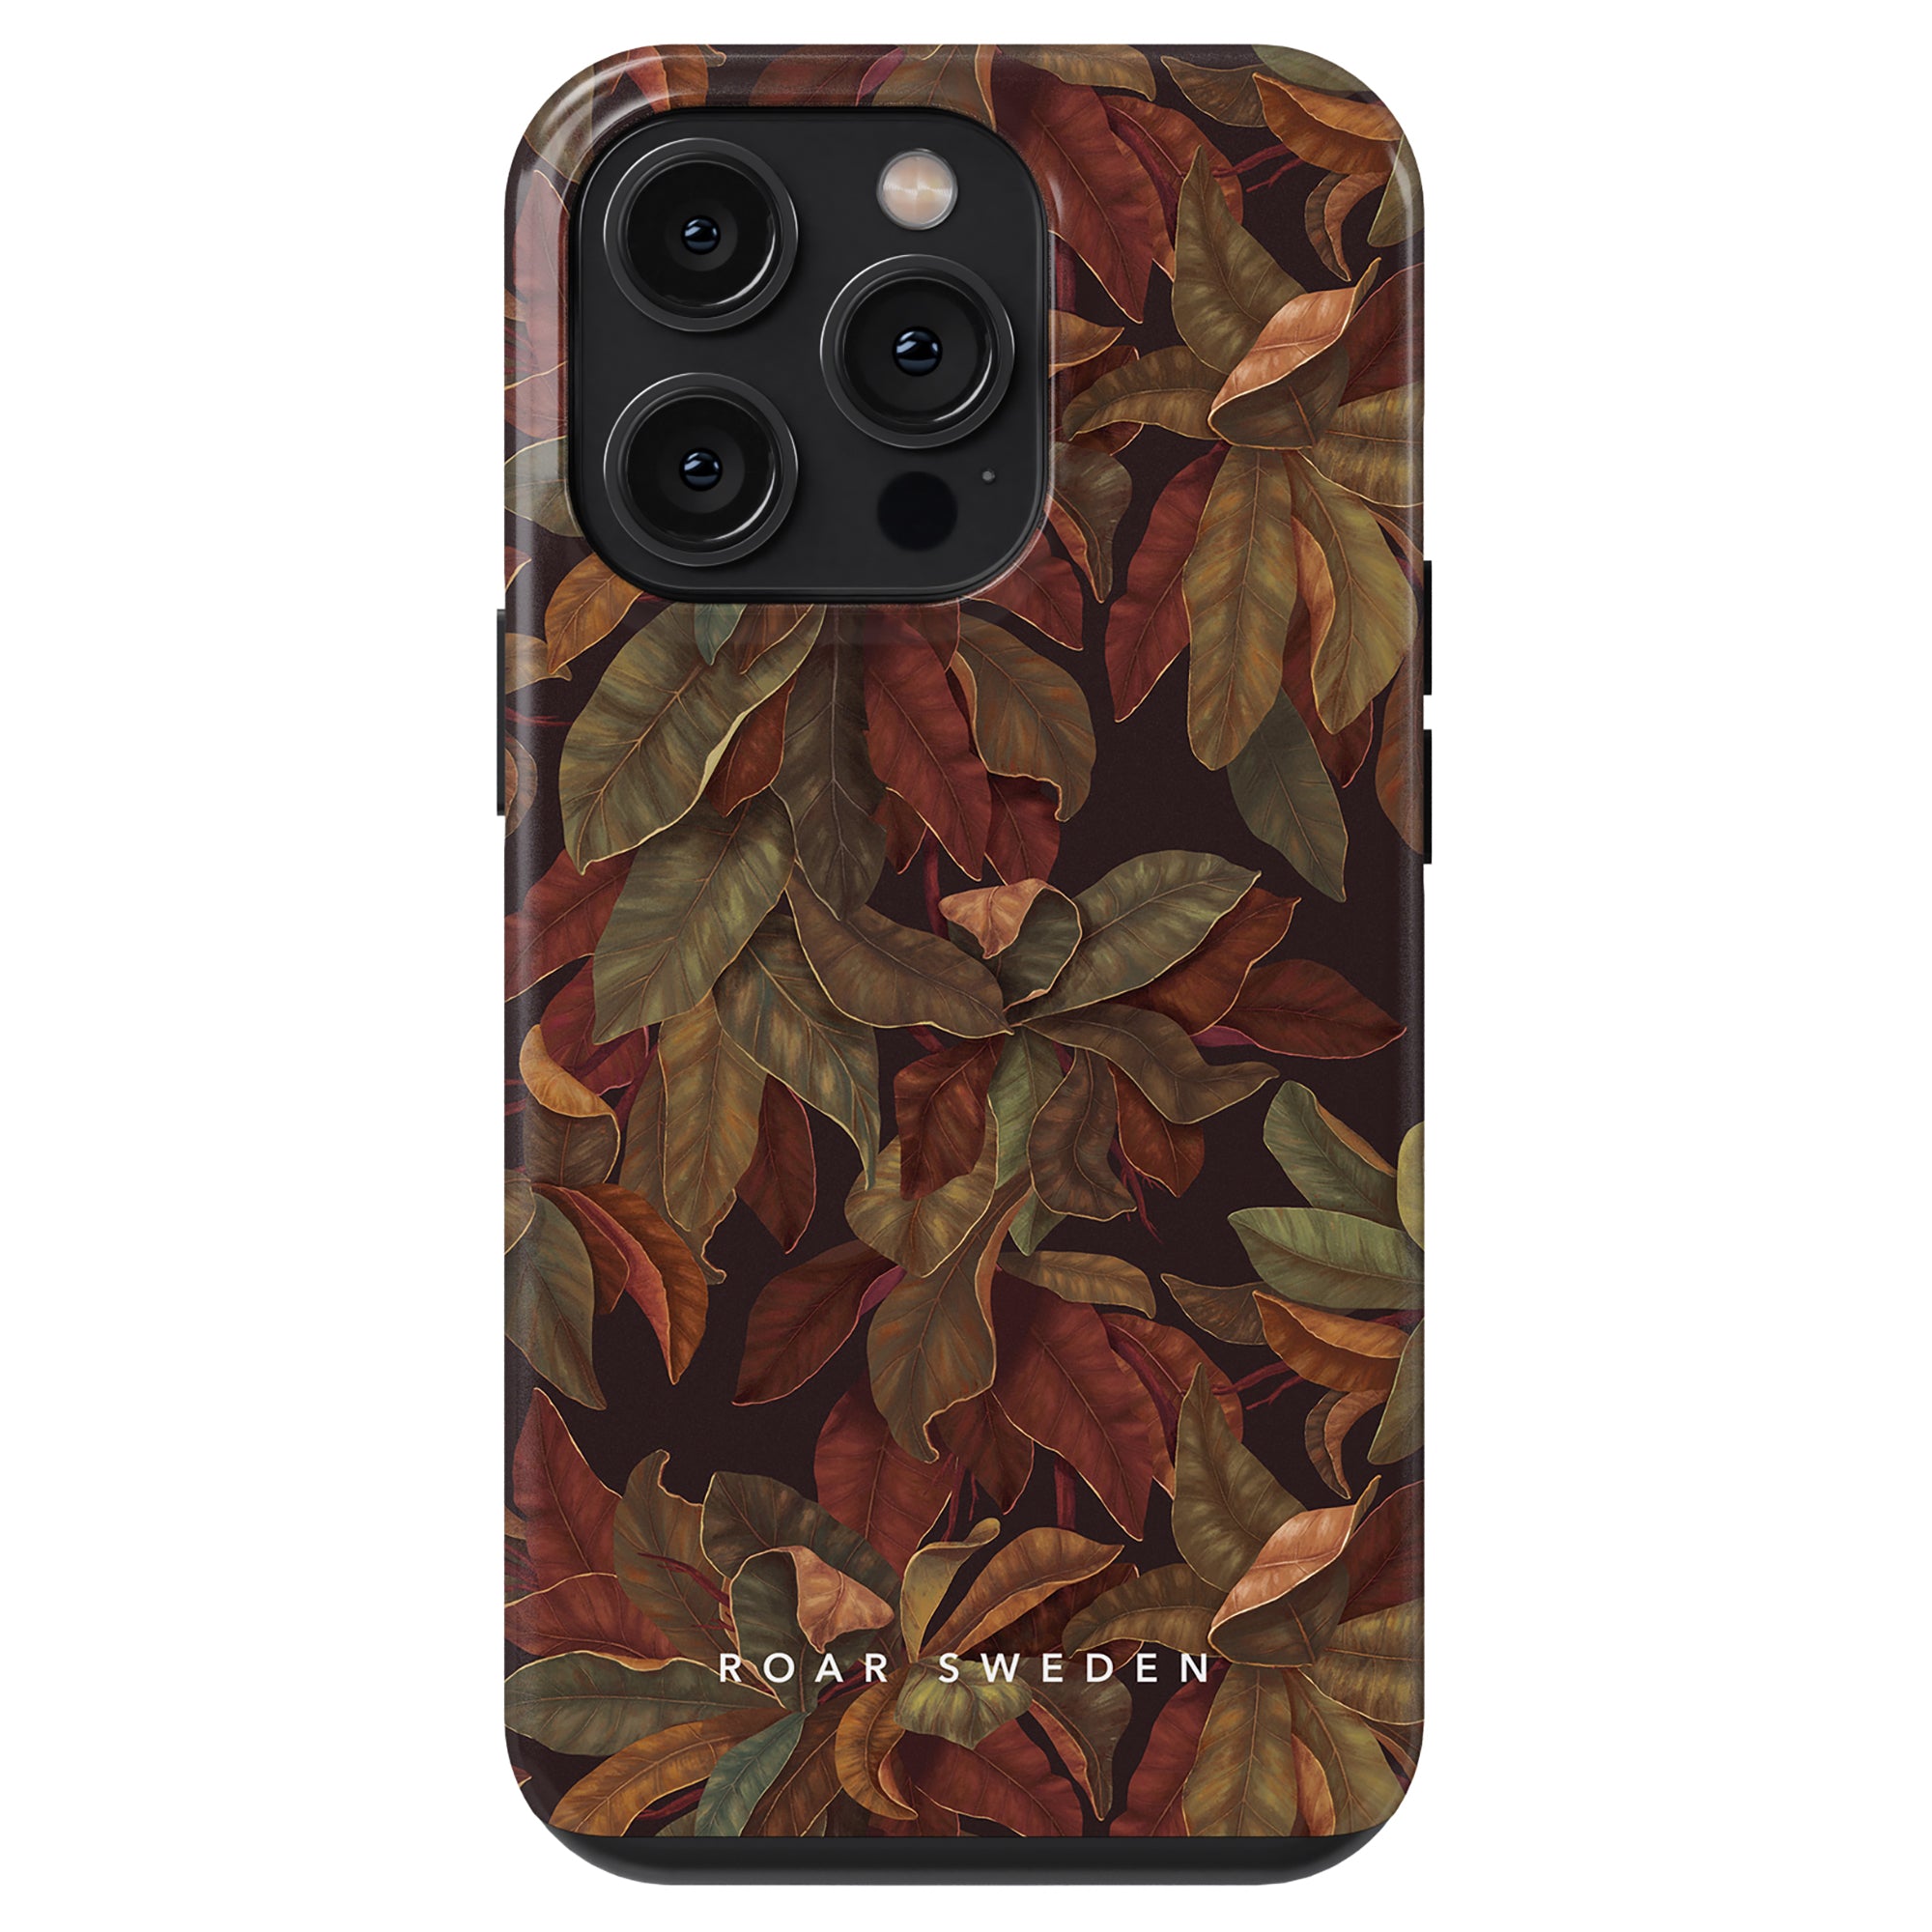 A phone case adorned with intricate leaf designs, the Autumn - Tough Case offers both style and protection.